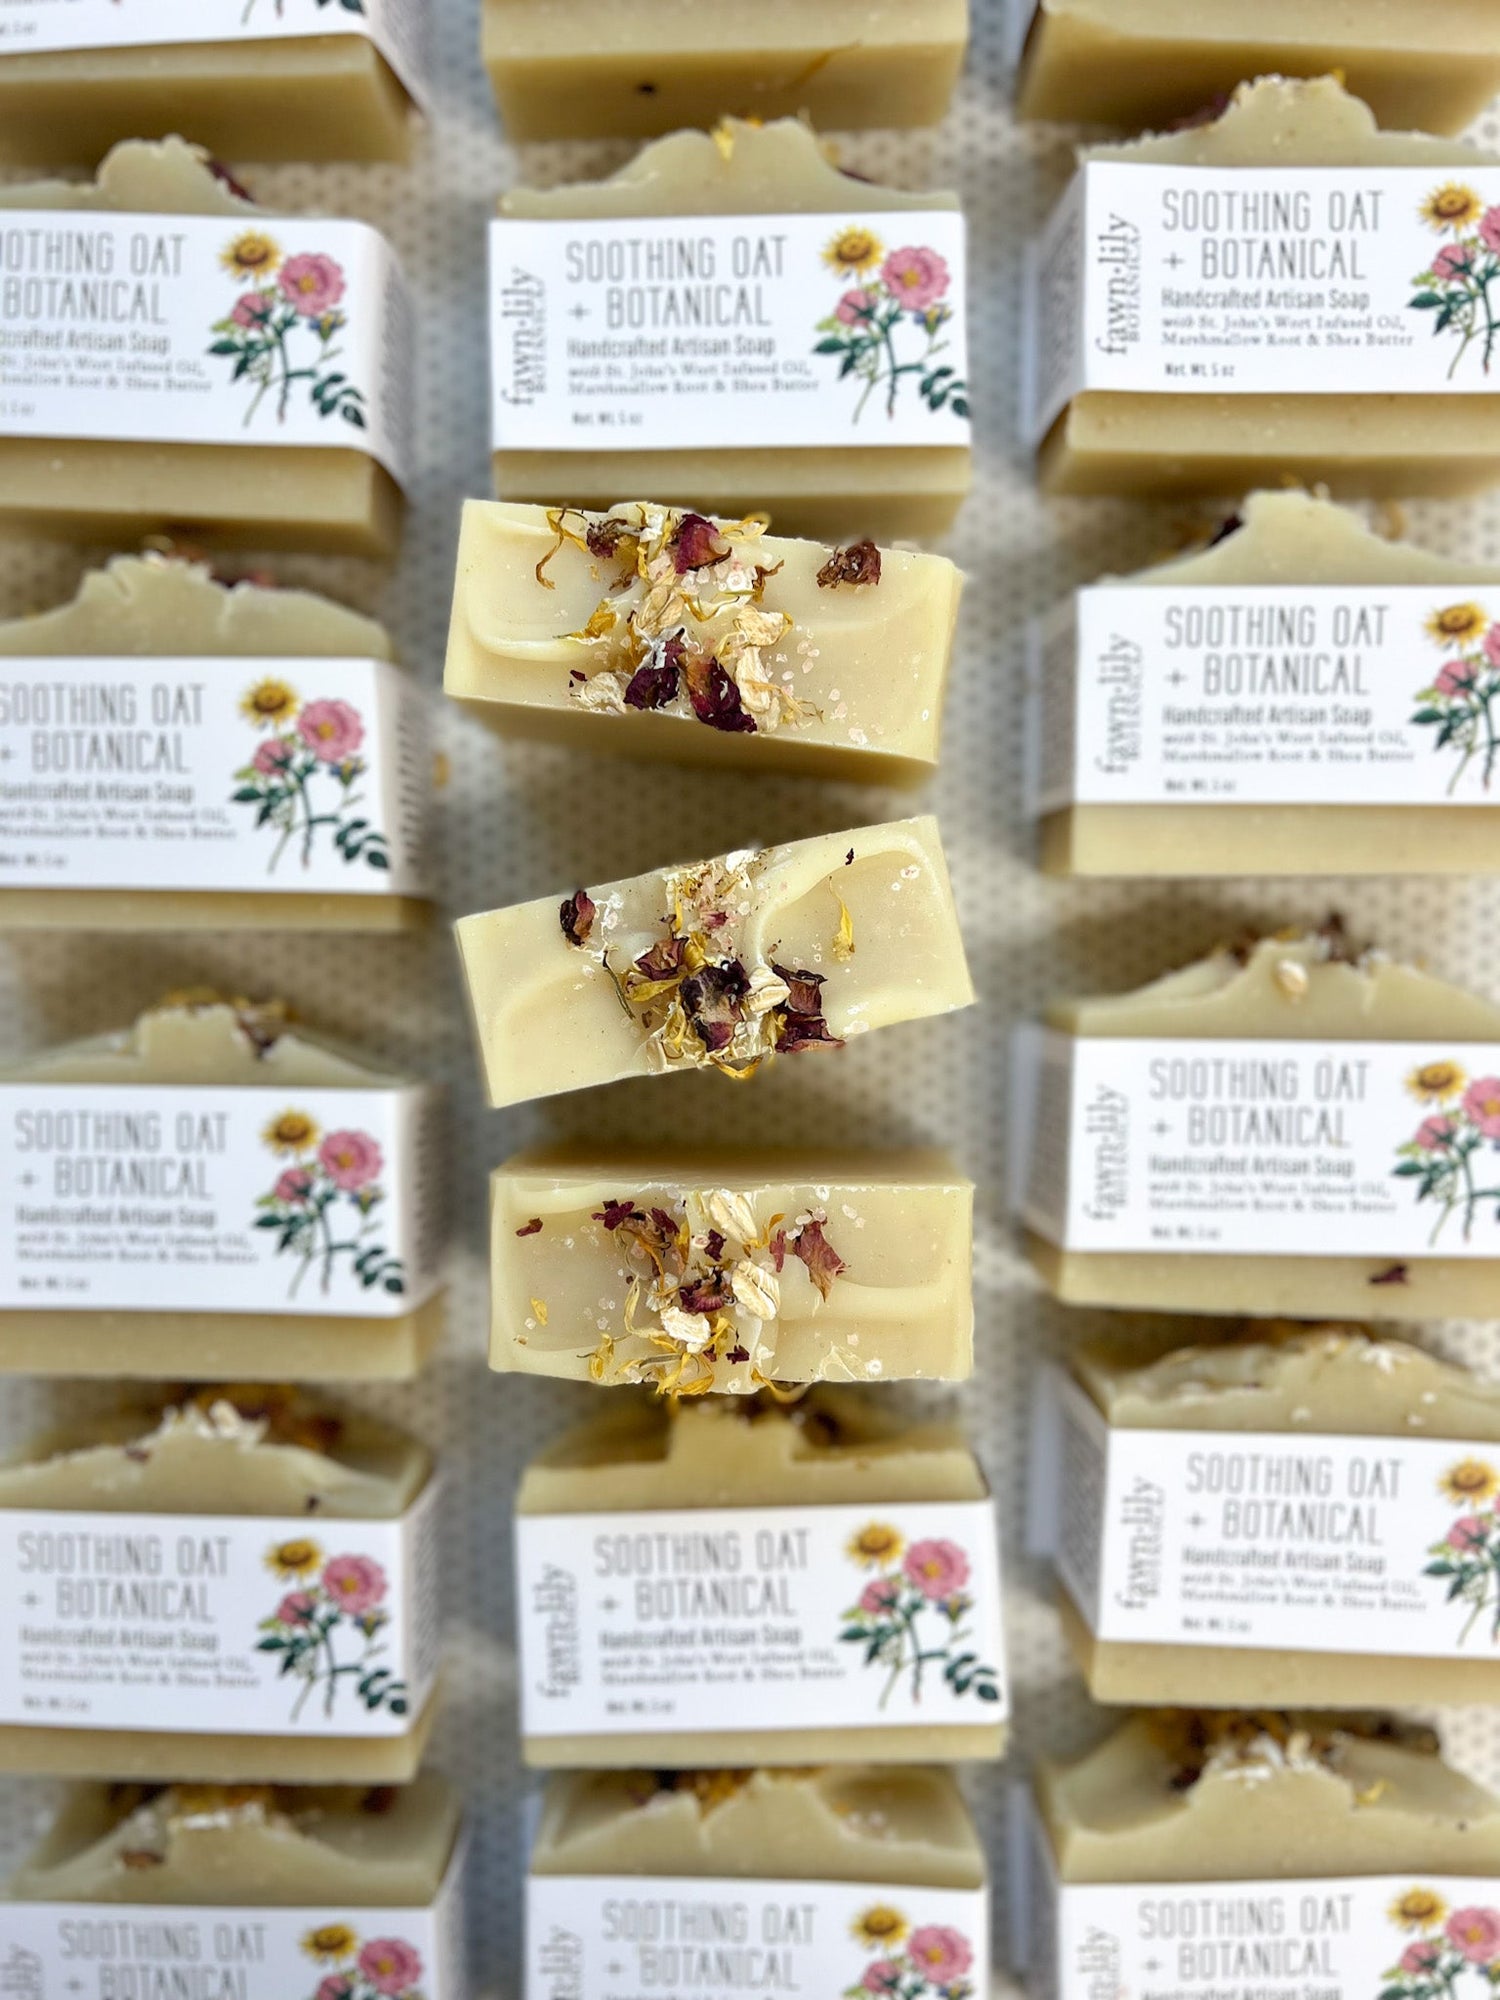 handcrafted artisanal cold-process soap made from organic ingredients and botanicals plant-based soap